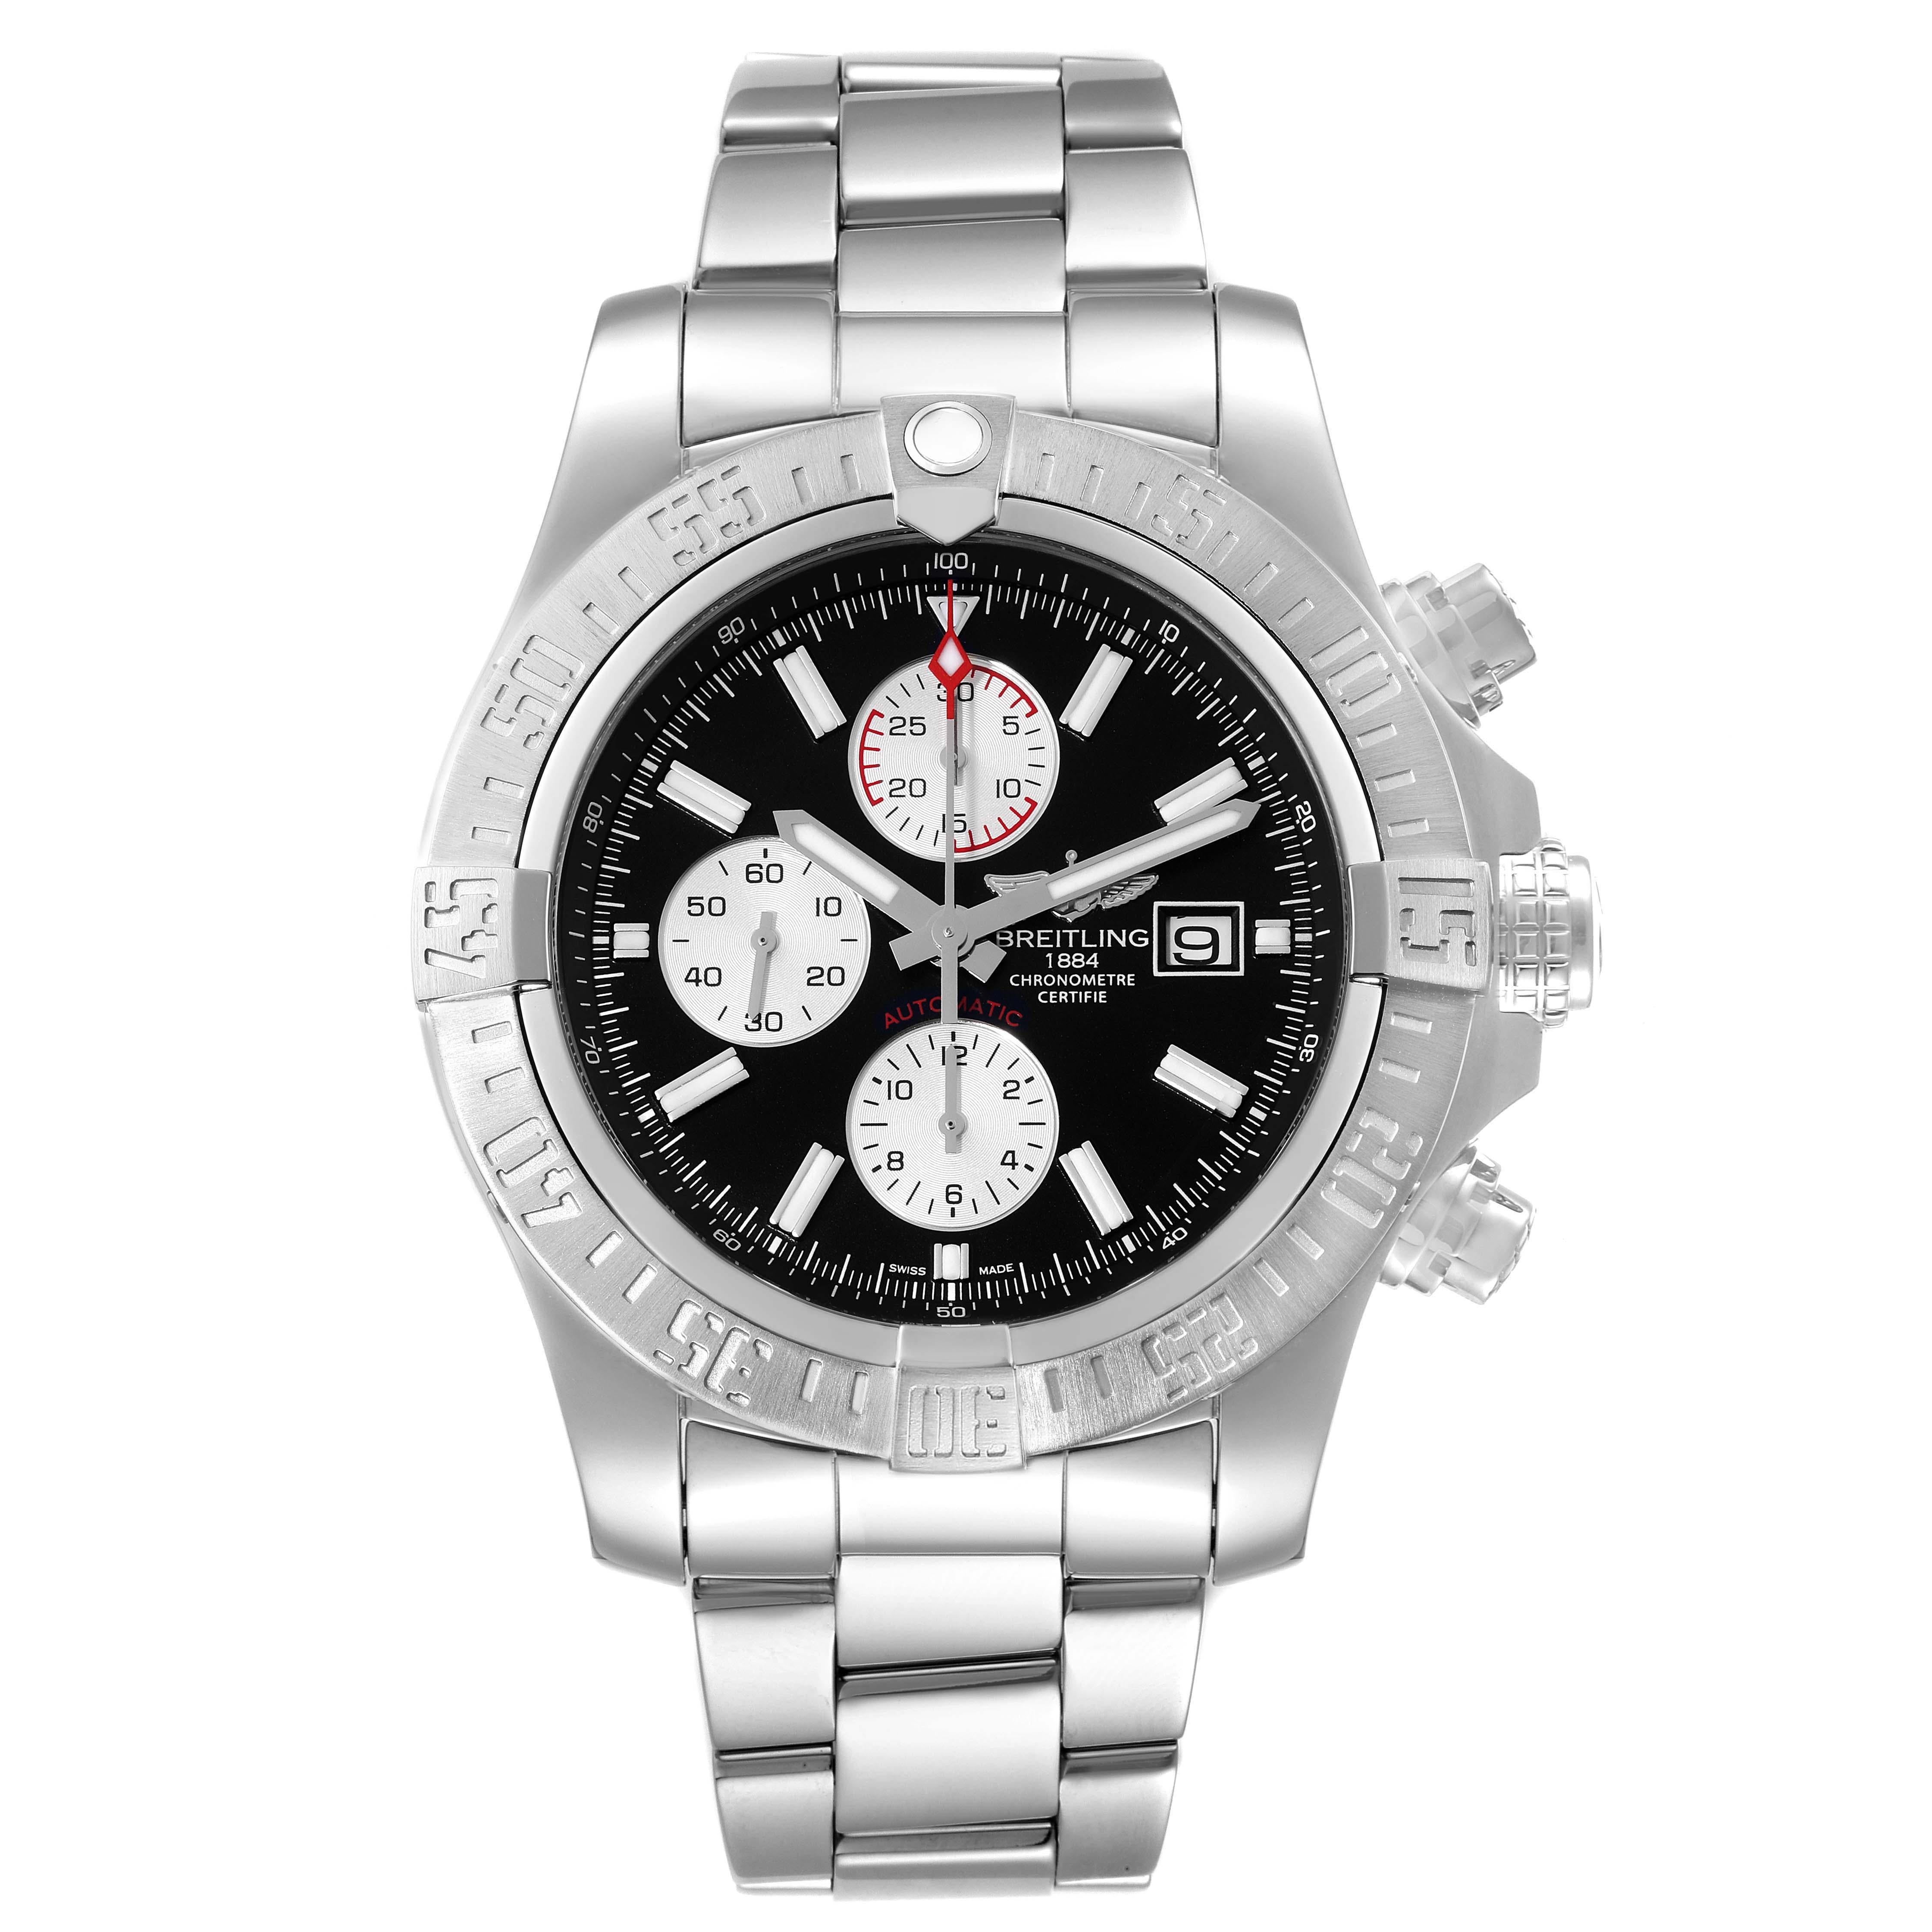 Breitling Super Avenger II Black Dial Steel Mens Watch A13371. Self-winding automatic movement with chronograph function. Stainless steel case 48 mm in diameter with screwed-locked crown and pushers. Case thickness 17.7 mm. Stainless steel